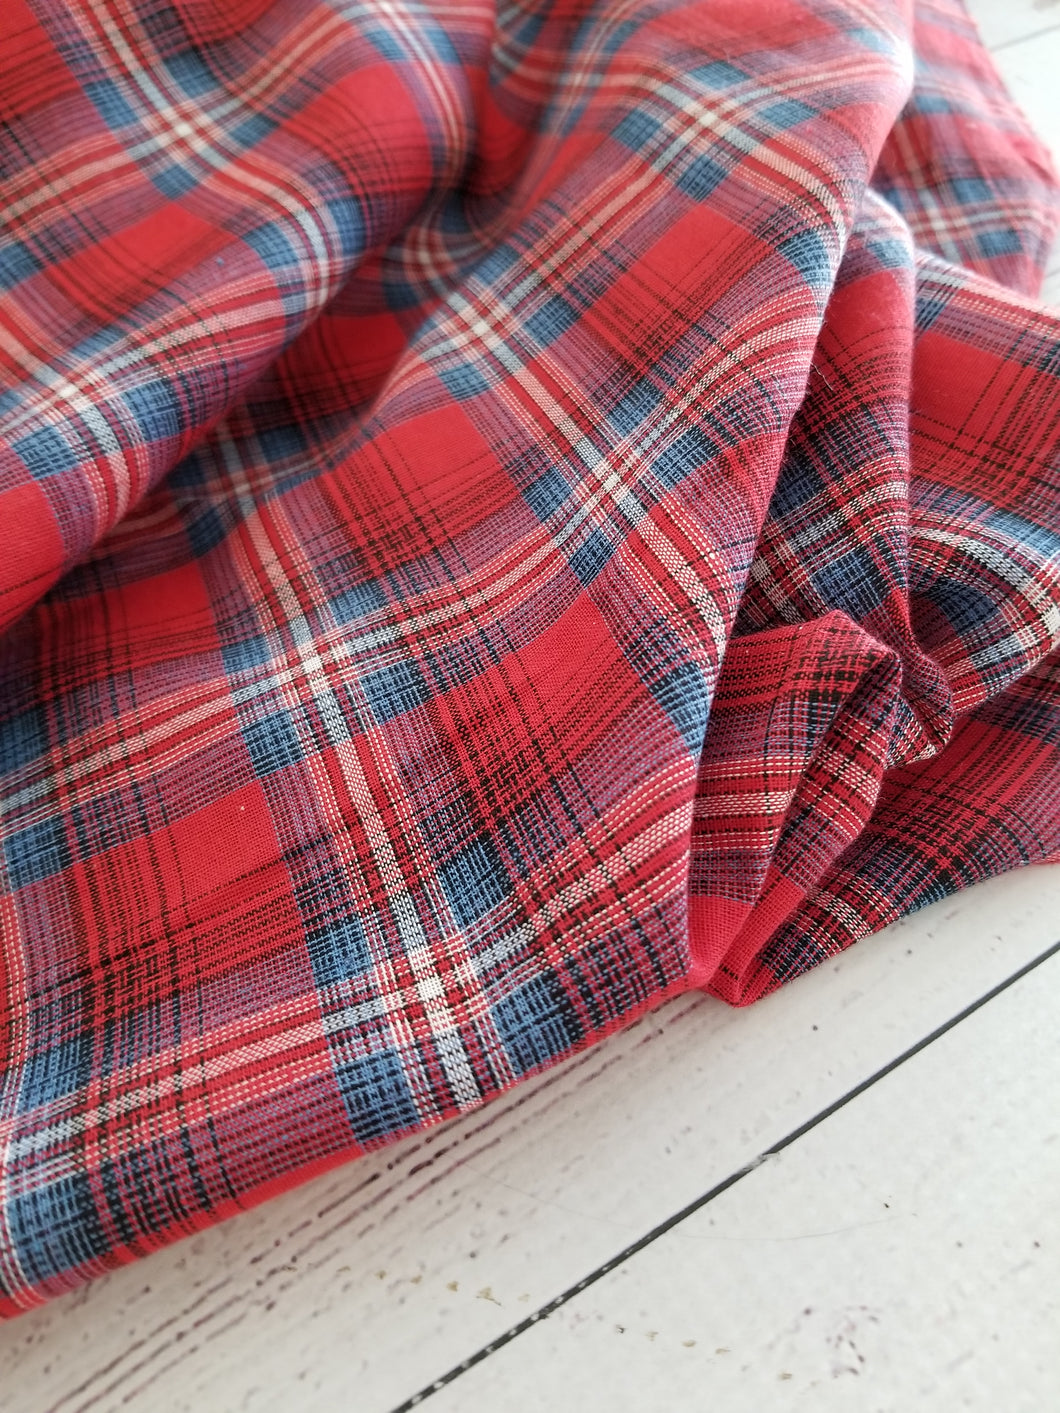 145cm Wide Flannel Two-sided Sanded Yarn-dyed Plaid Pure Cotton